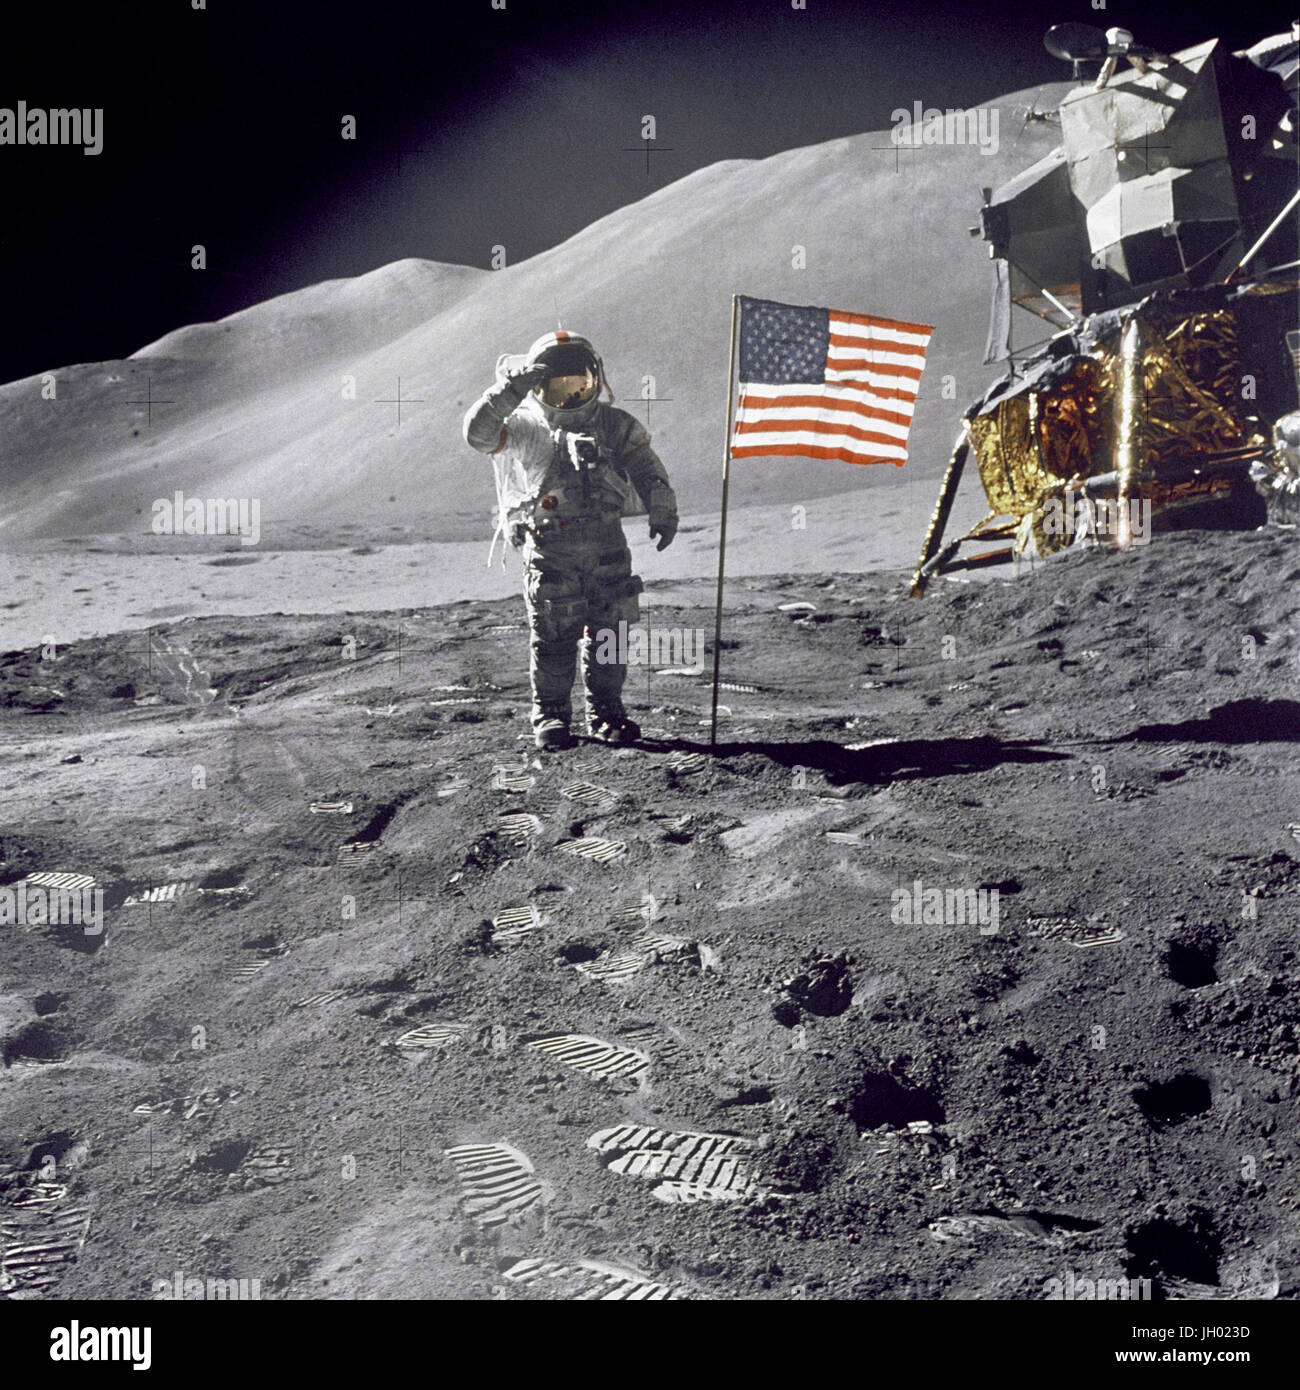 Astronaut David R. Scott, commander, gives a military salute while standing beside the deployed U.S. flag during the Apollo 15 lunar surface extravehicular activity (EVA) at the Hadley-Apennine landing site. The flag was deployed toward the end of EVA-2. The Lunar Module 'Falcon' is partially visible on the right. Hadley Delta in the background rises approximately 4,000 meters (about 13,124 feet) above the plain. The base of the mountain is approximately 5 kilometers (about 3 statute miles) away. This photograph was taken by Astronaut James B. Irwin, Lunar Module pilot. Stock Photo